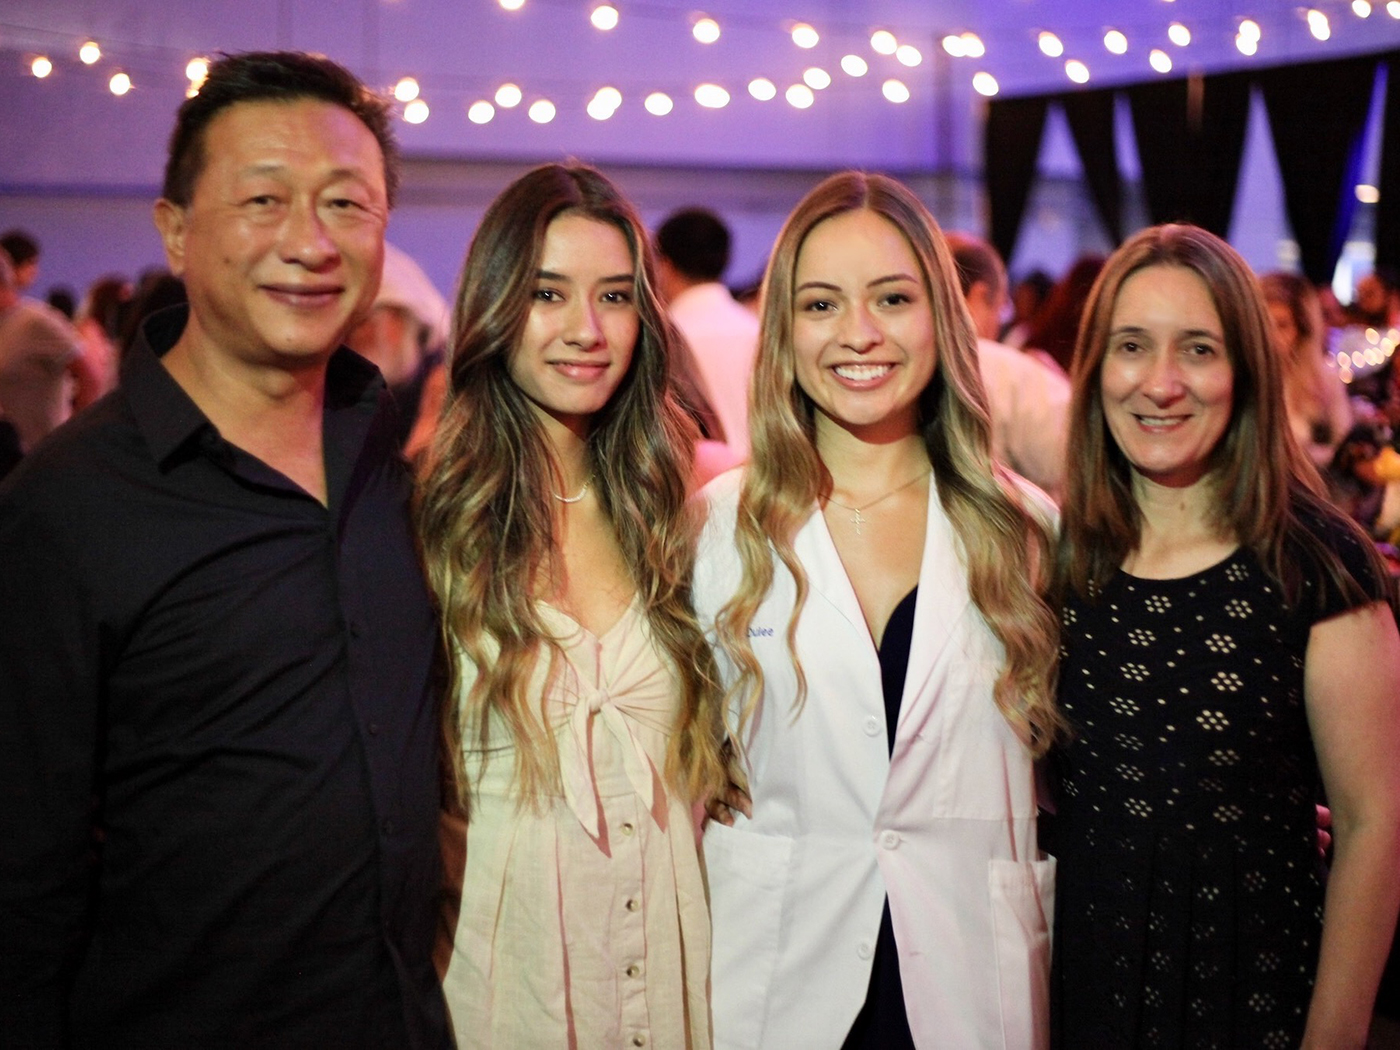 Aislyn Oulee flanked by her mother, her sister and her father at the White Coat ceremony